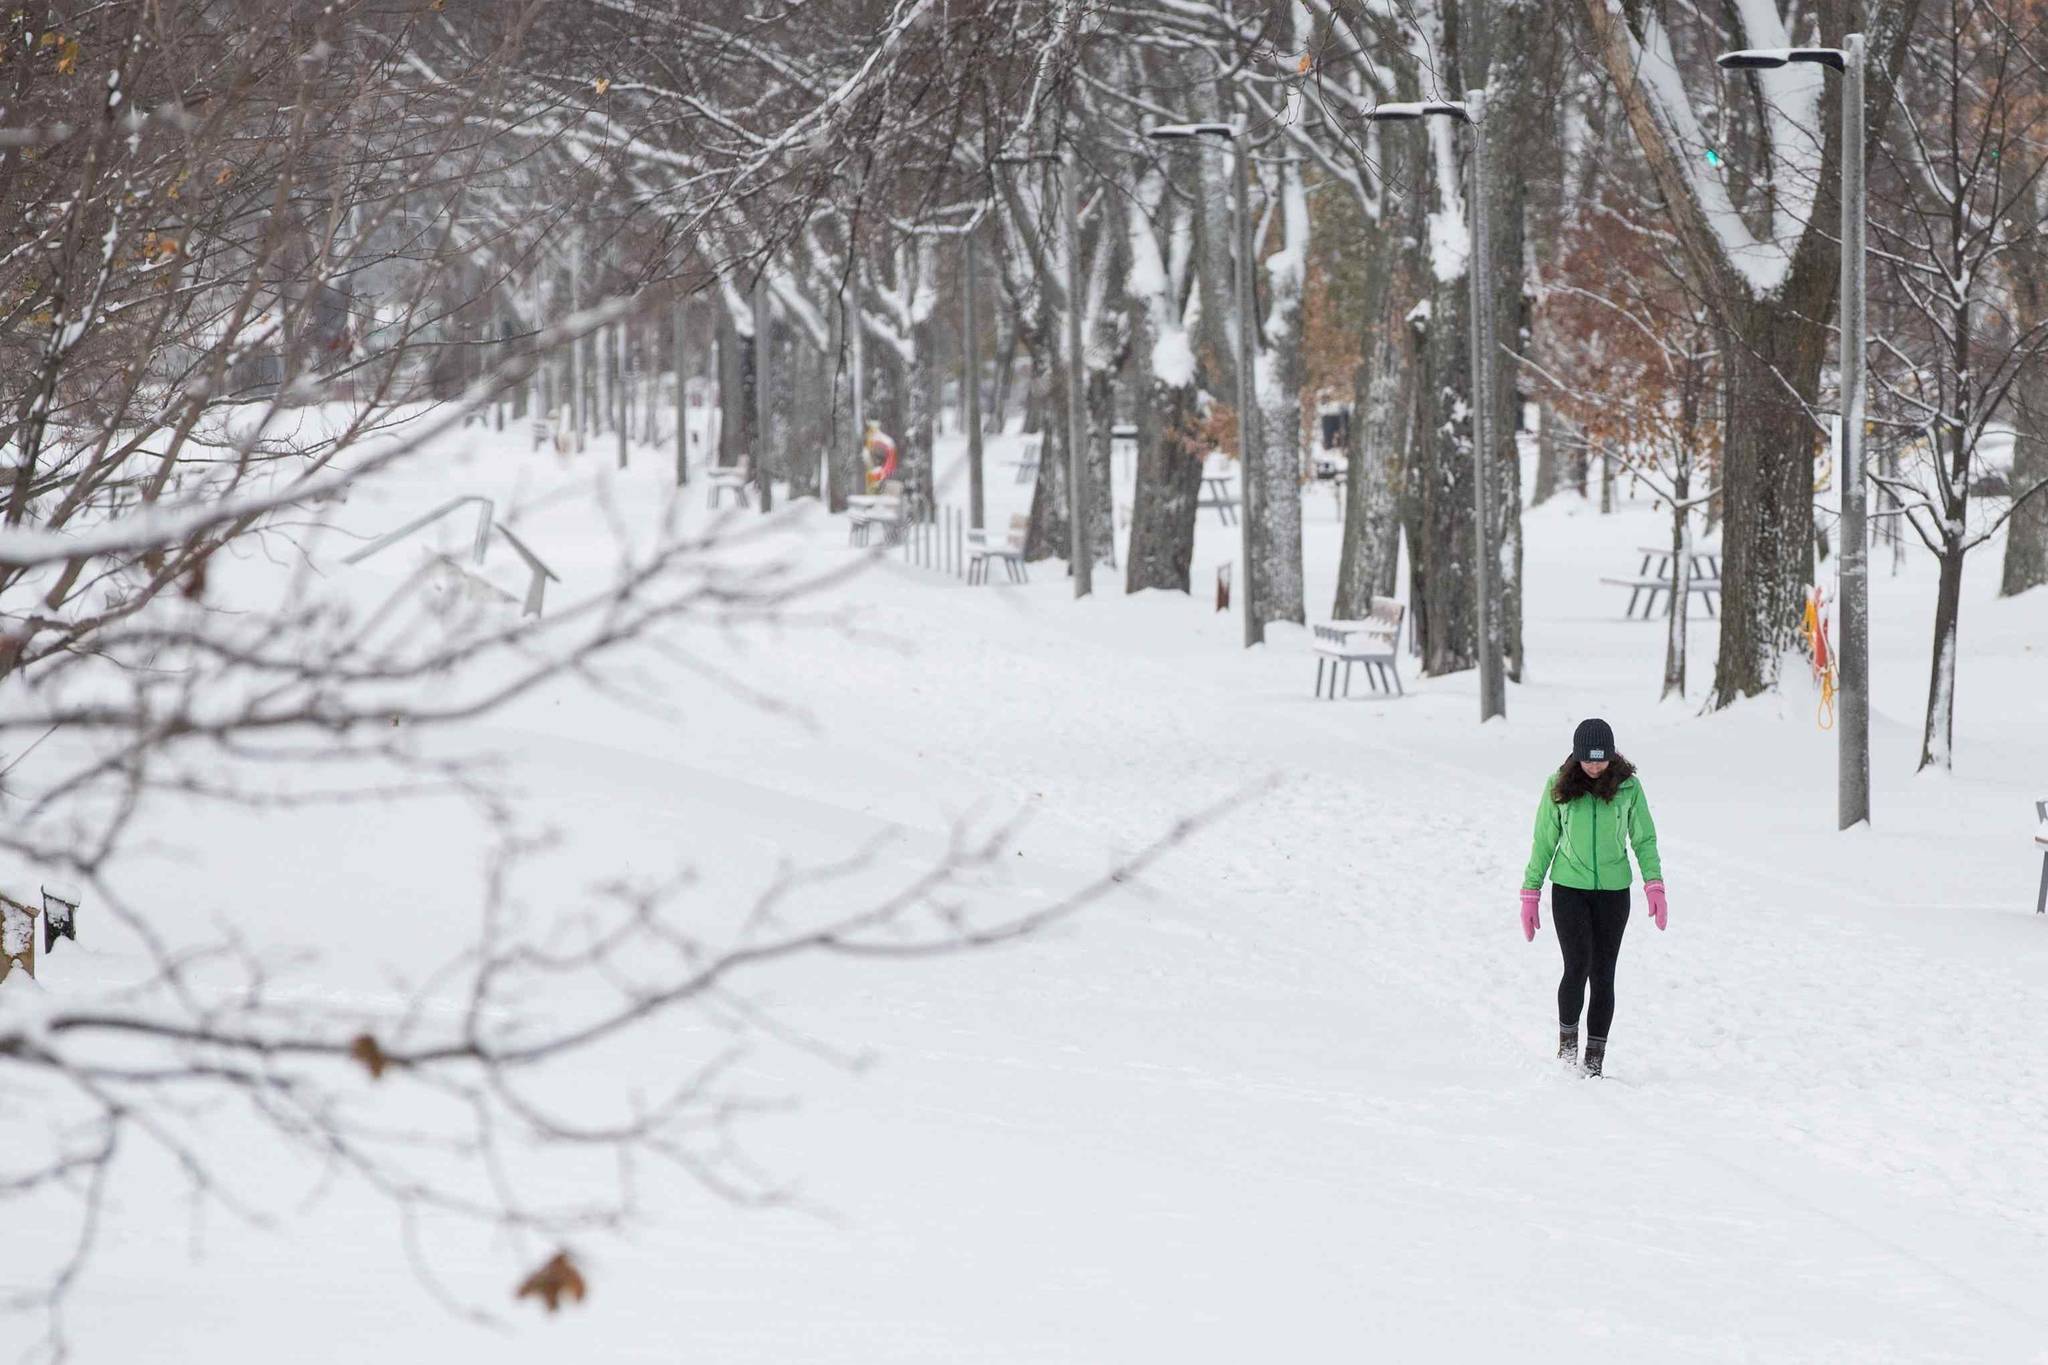 Winter weather hits parts of Canada